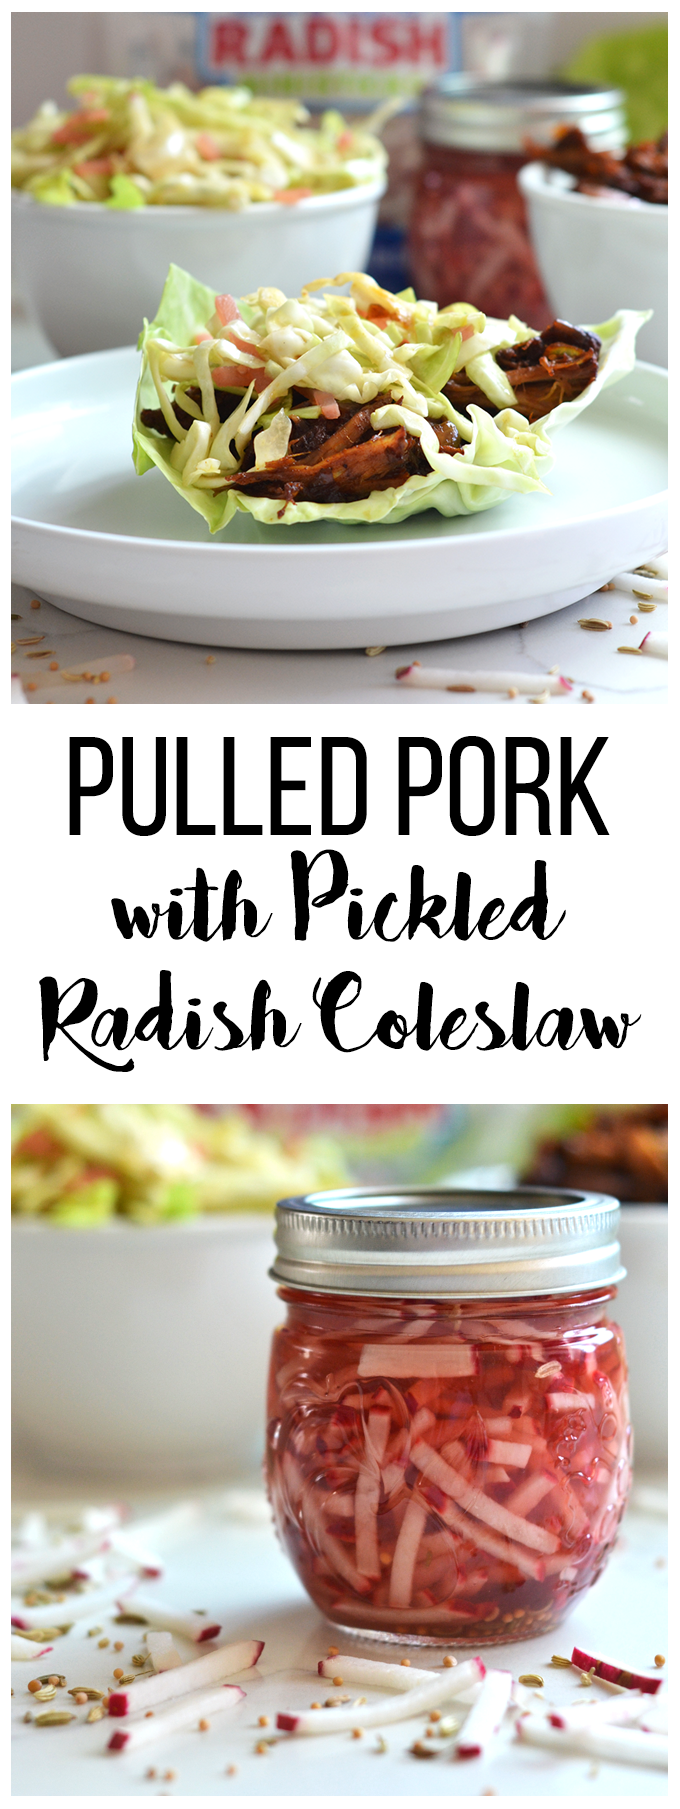 This Pulled Pork with Pickled Radish Coleslaw is a fun meal for spring and summer to preserve and use up those radishes! The pulled pork is full of flavor and comes together in a dutch oven!